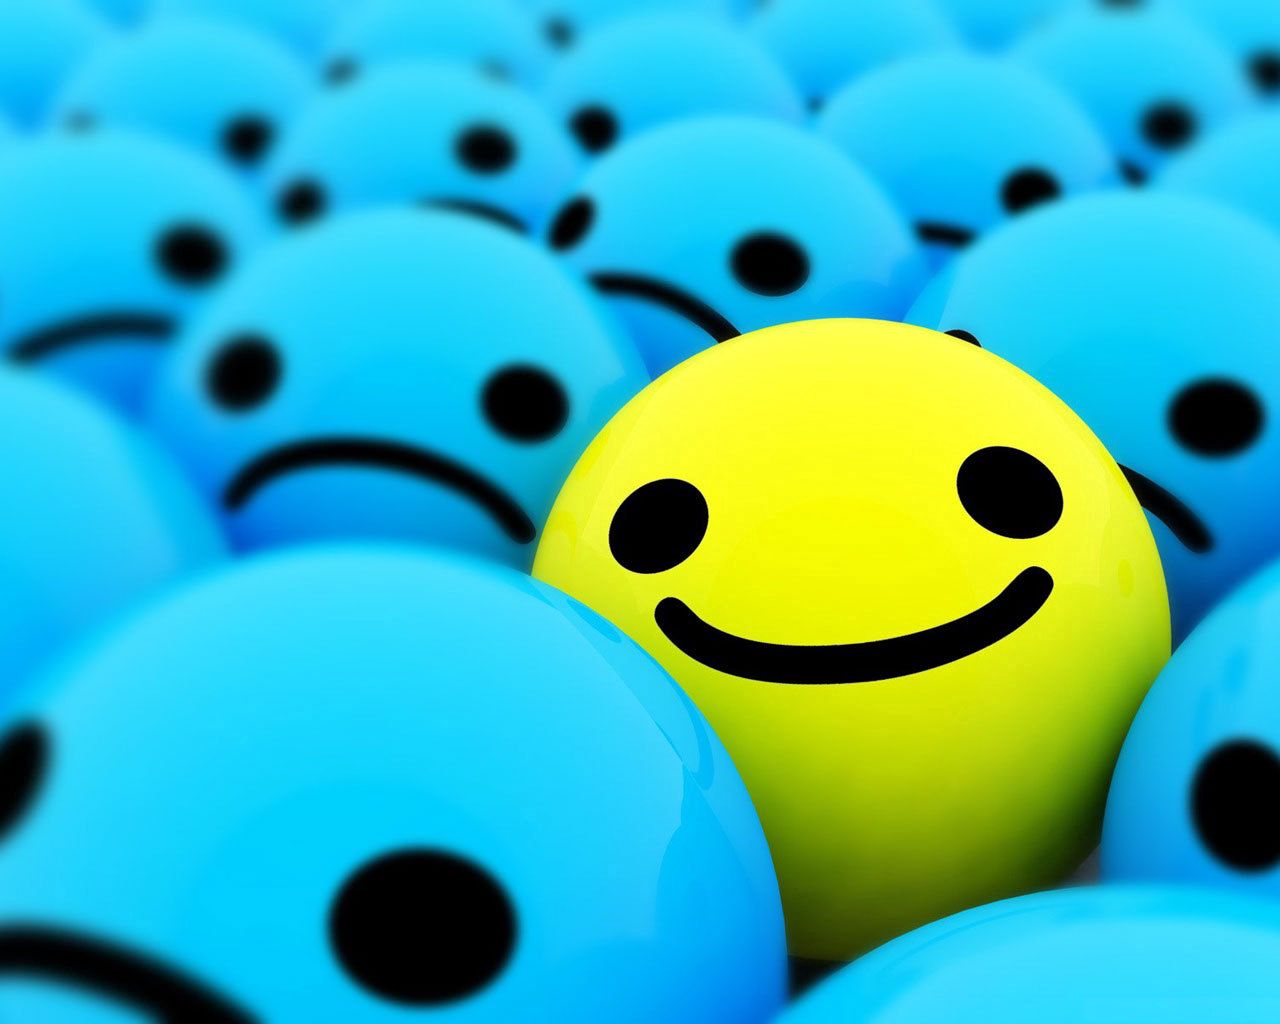 bright, yellow, smile, abstract, blue Full HD